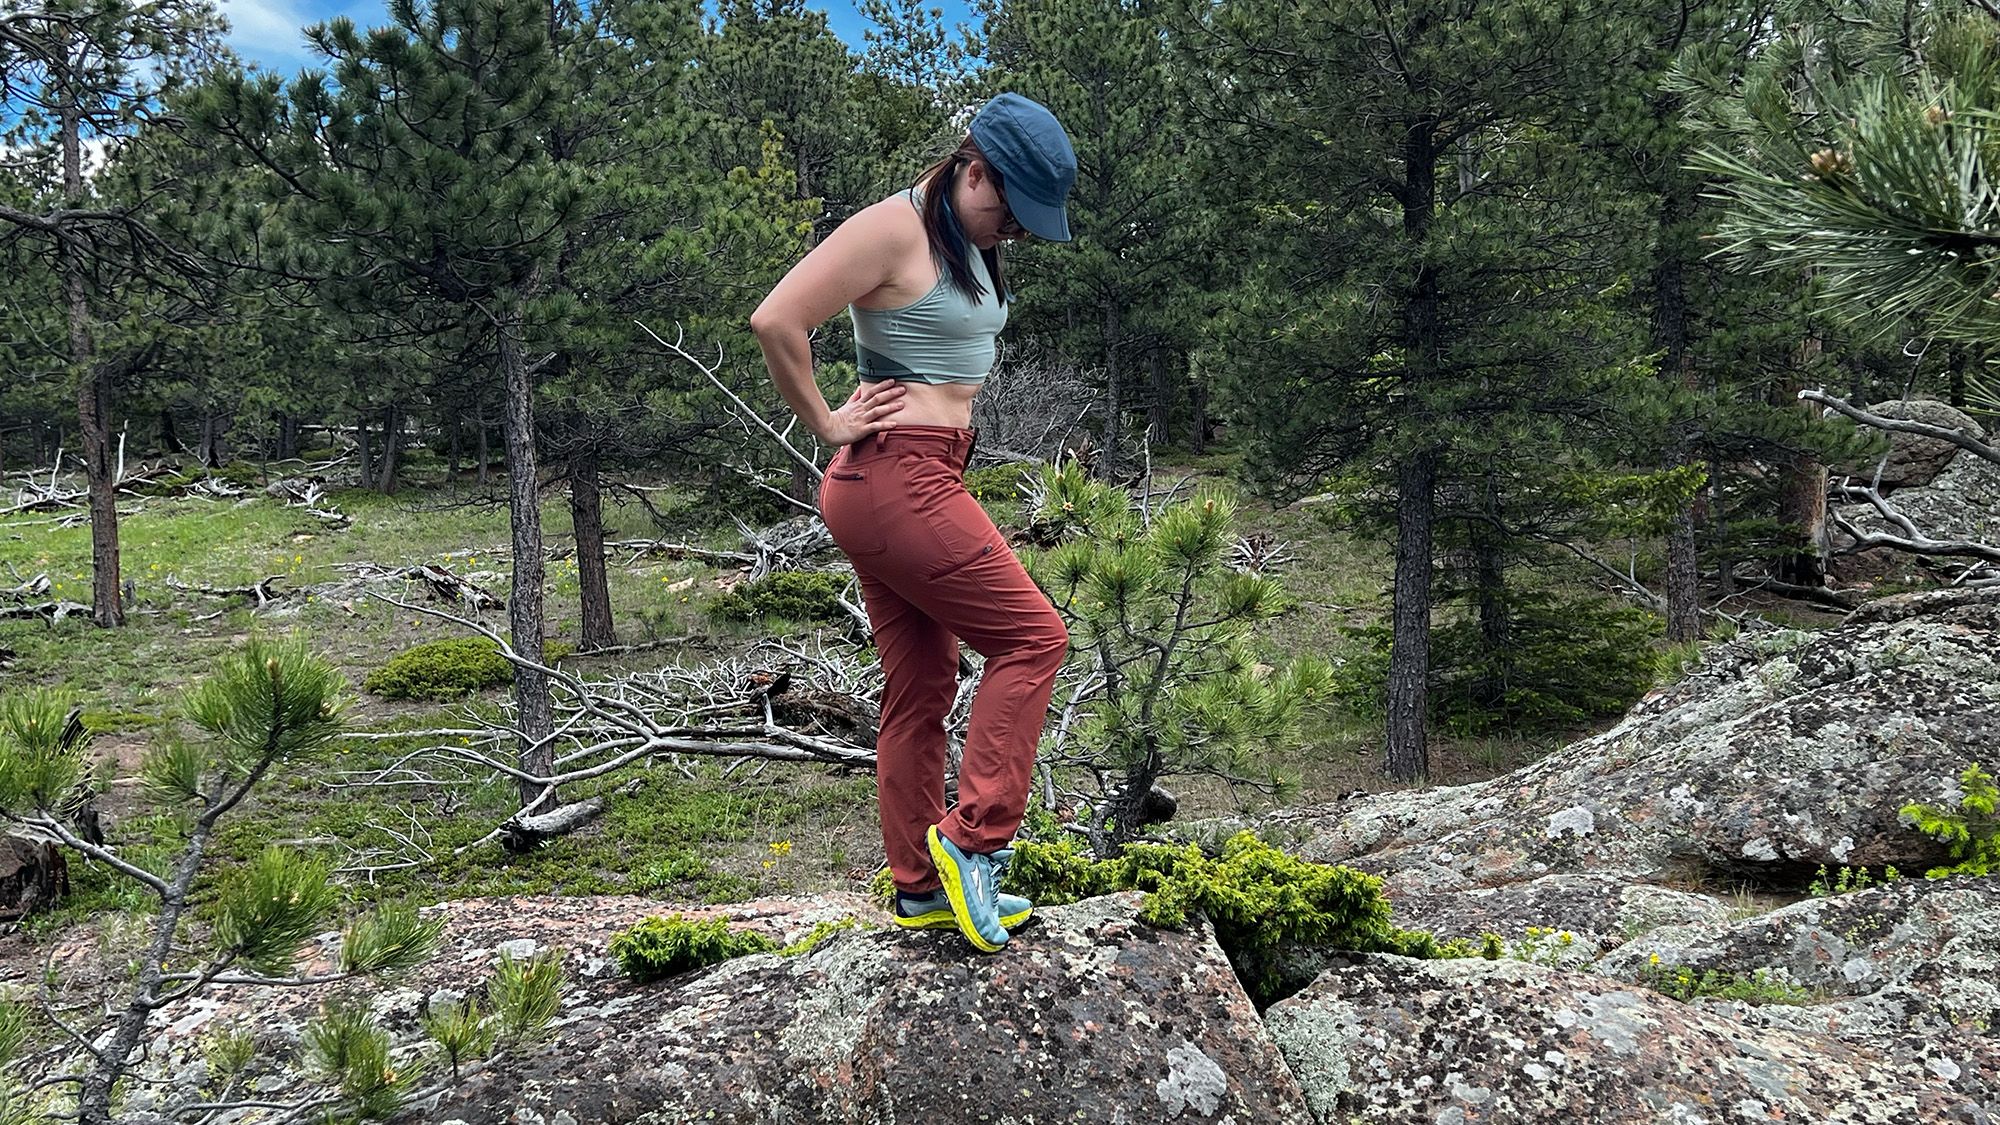 Hiking Pants for Women, Hiking and Trekking Pants for Women